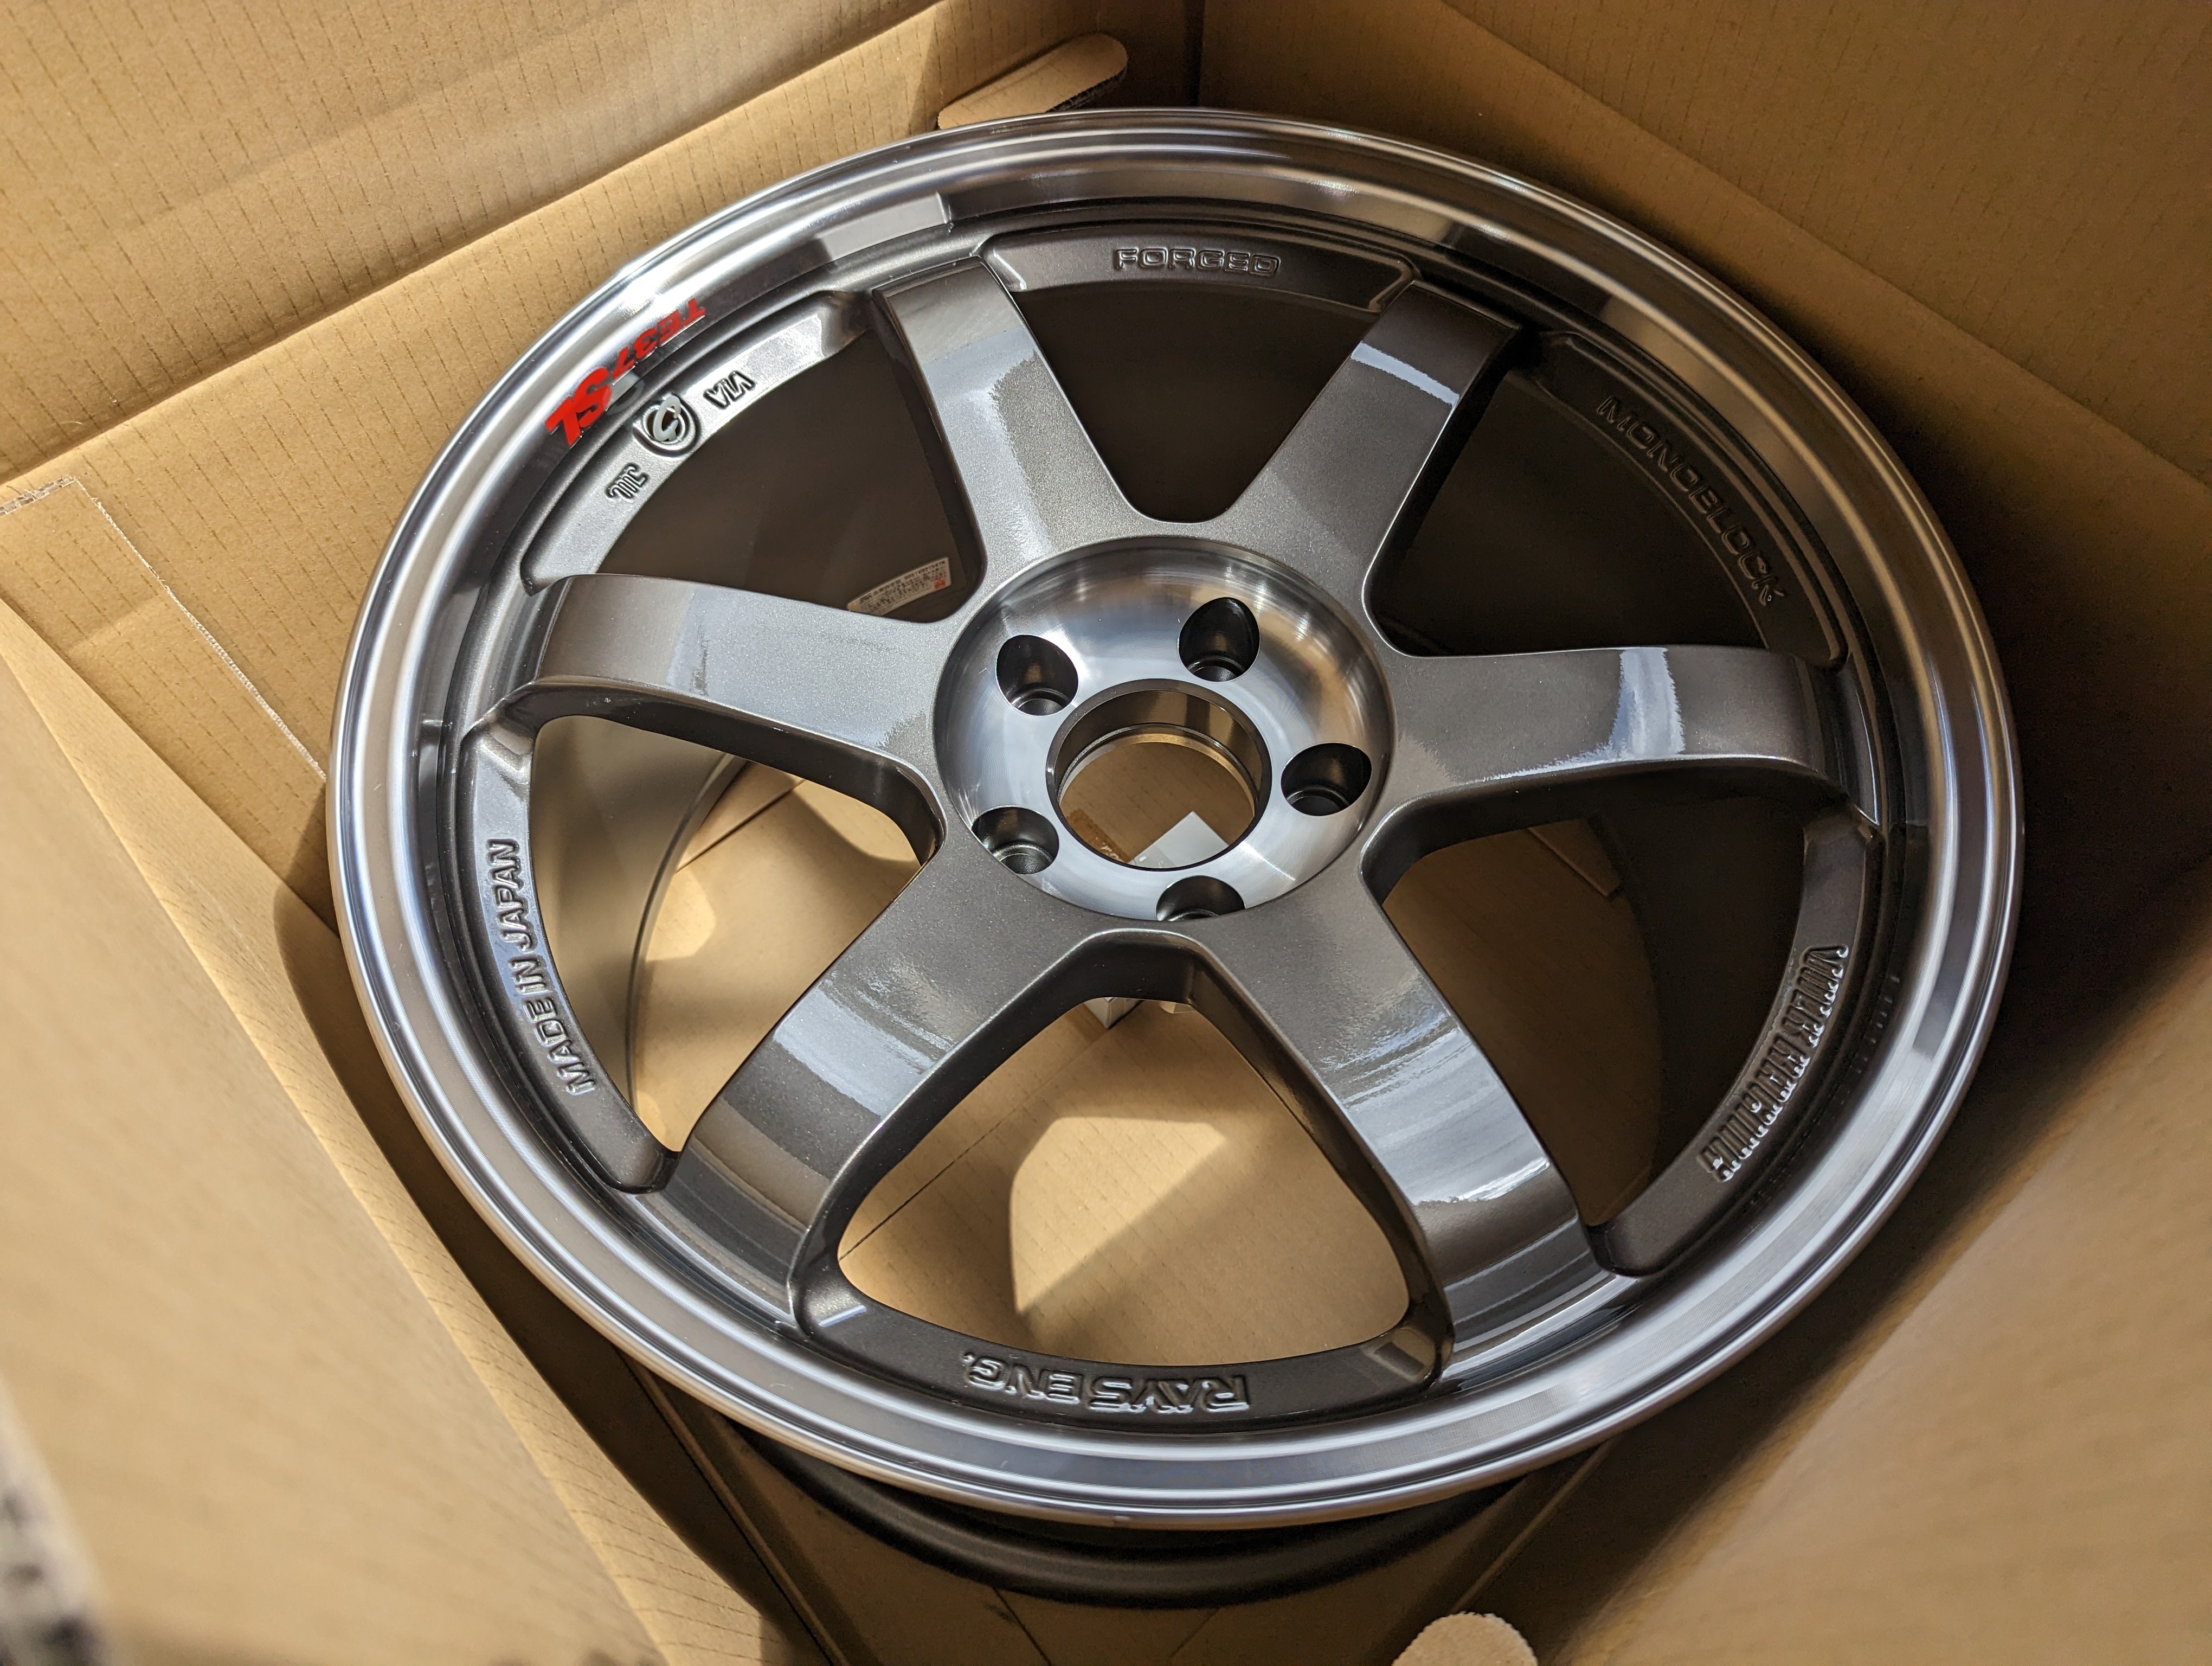 *PAIR* *Discontinued* Brand New in Box Double (Pressed Graphite) Rays Engineering Volks Racing TE37SL with Genuine Volk Racing Stickers - 18x10.5 +15